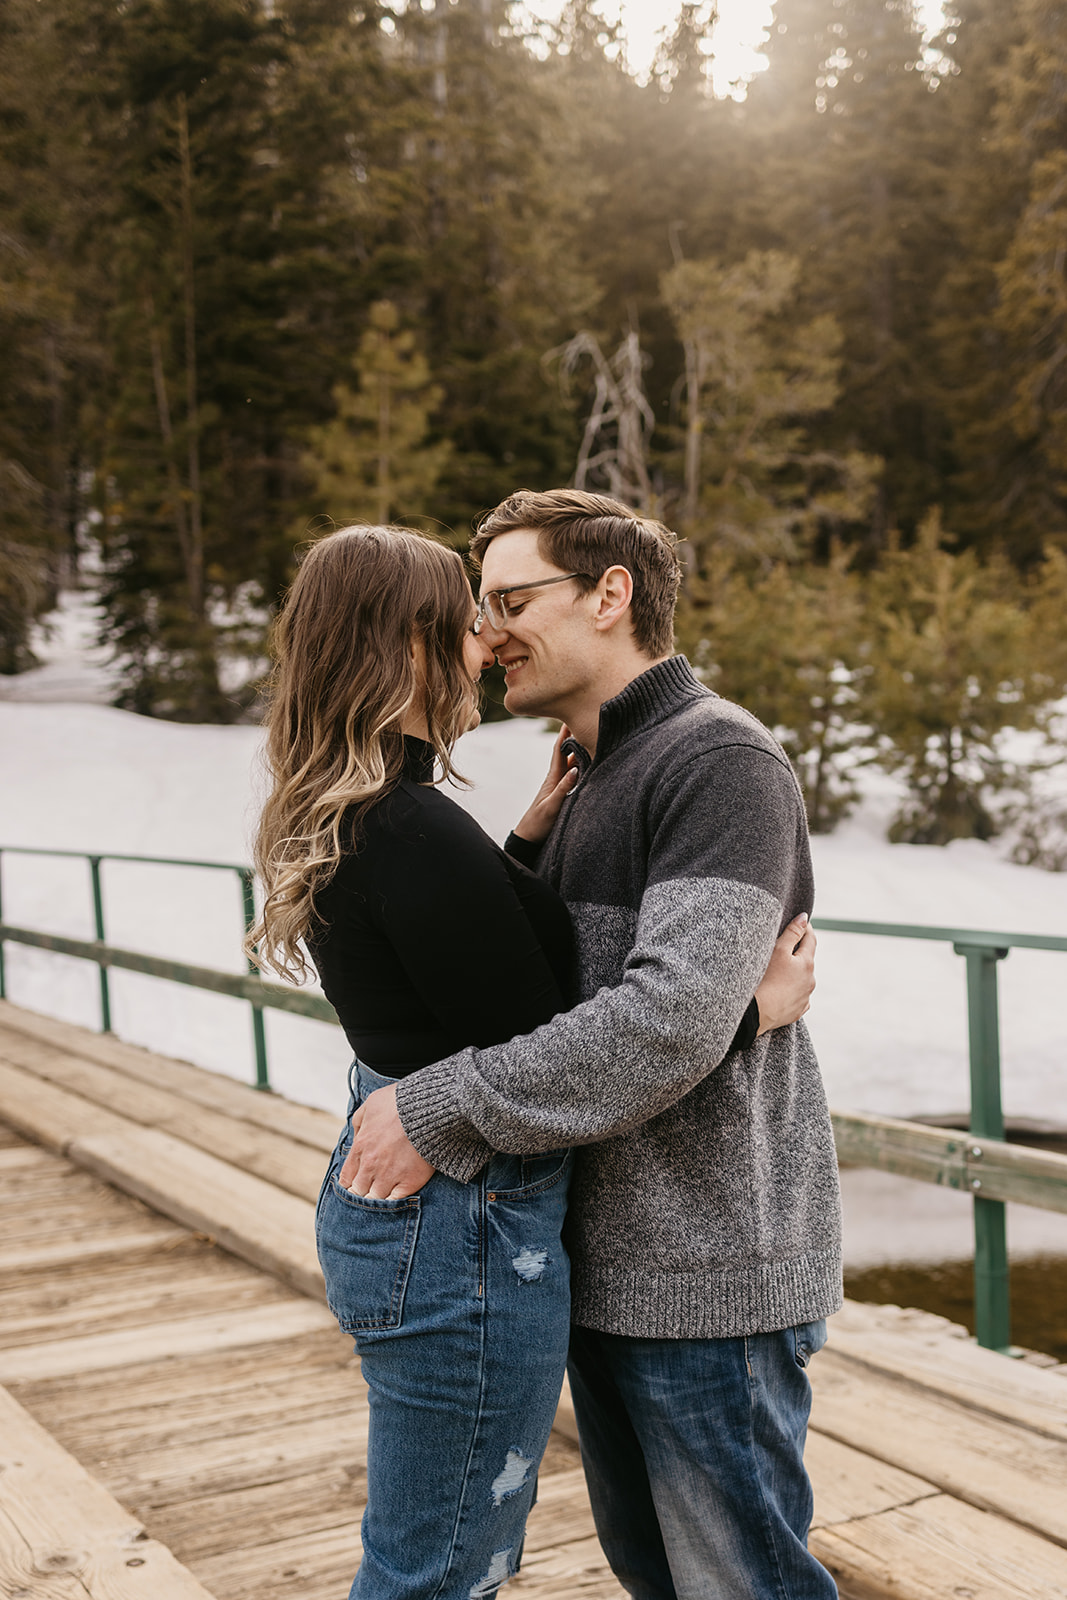 Dani Rawson Photography, a Lake Tahoe-based photographer, shares inspiration for a Truckee River Couples Session